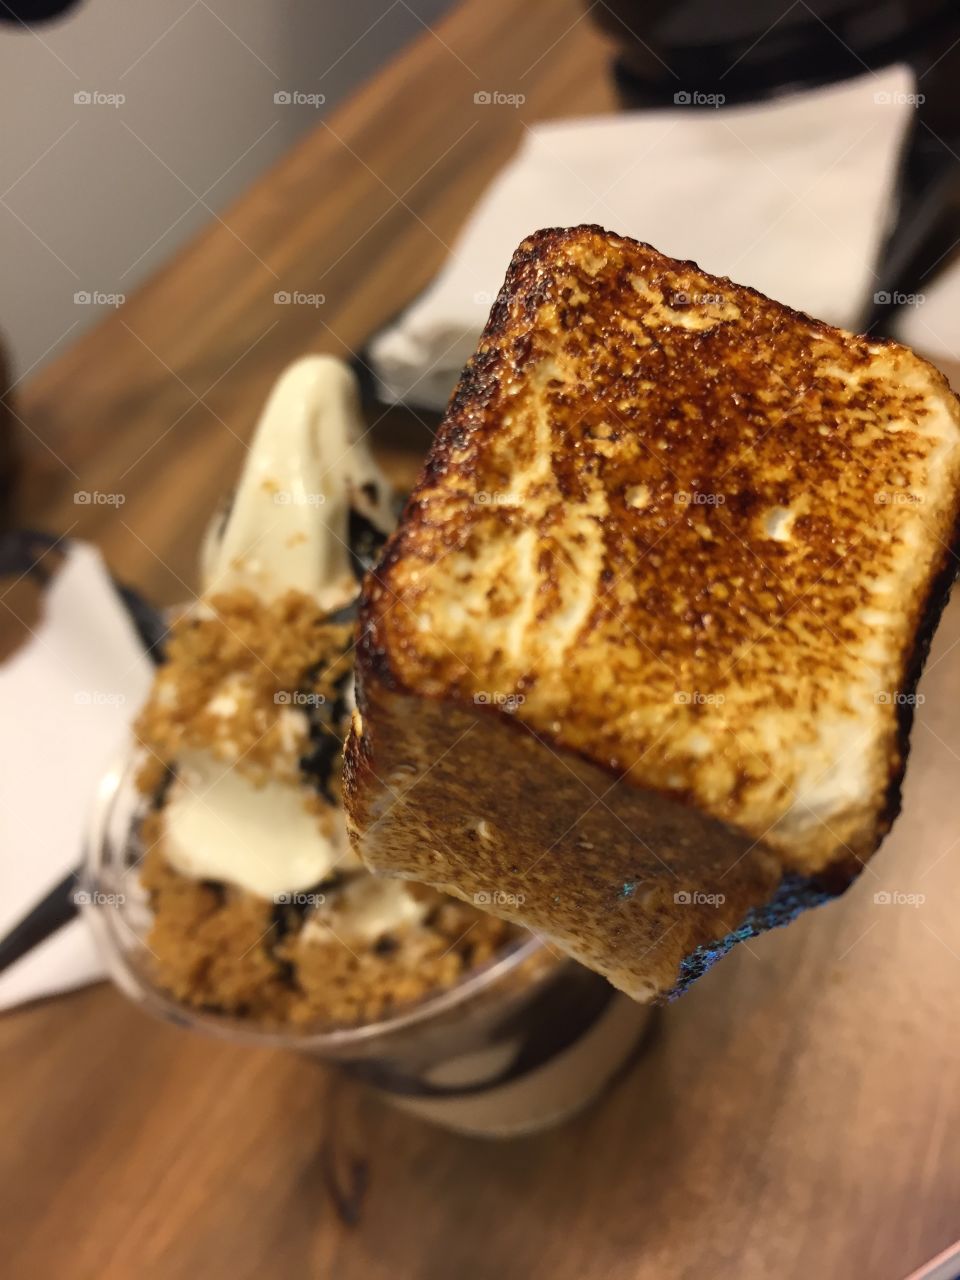 The Happy Camper Sundae with toasted marshmallow 